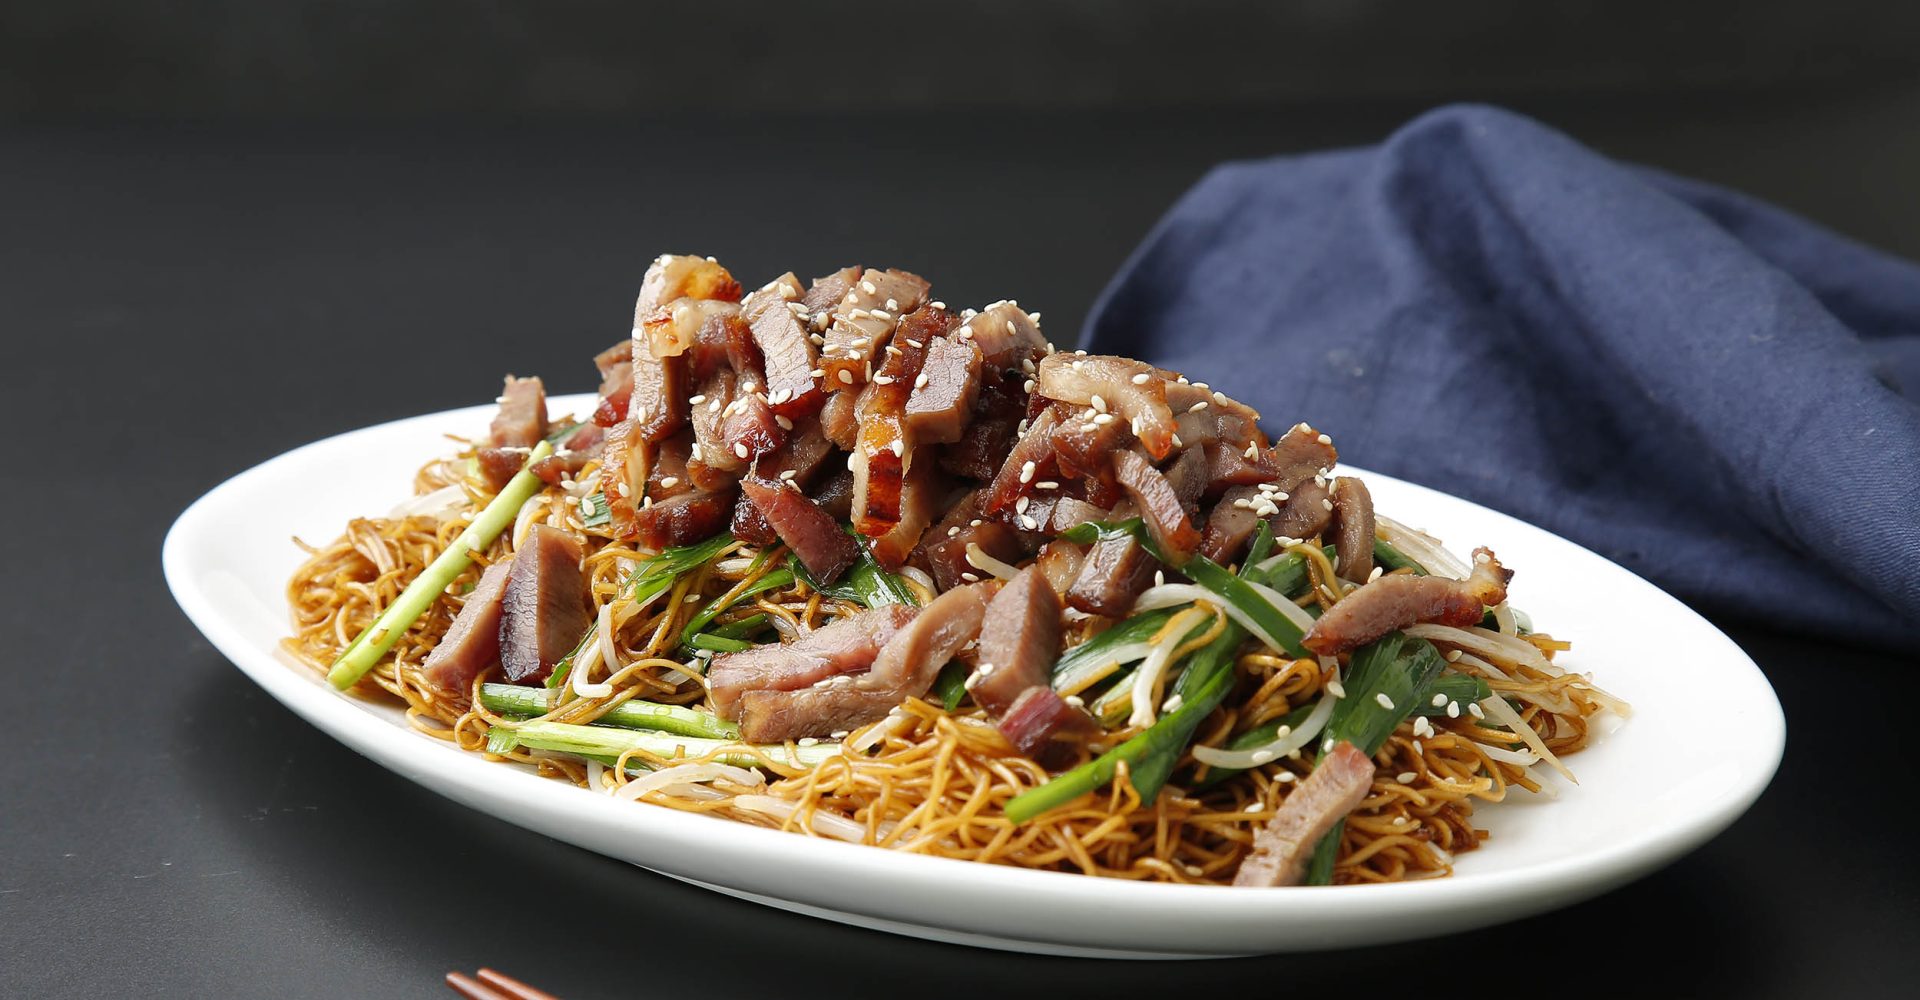 Xiu Noodles - Fried noodles with BBQ pork and soy sauce